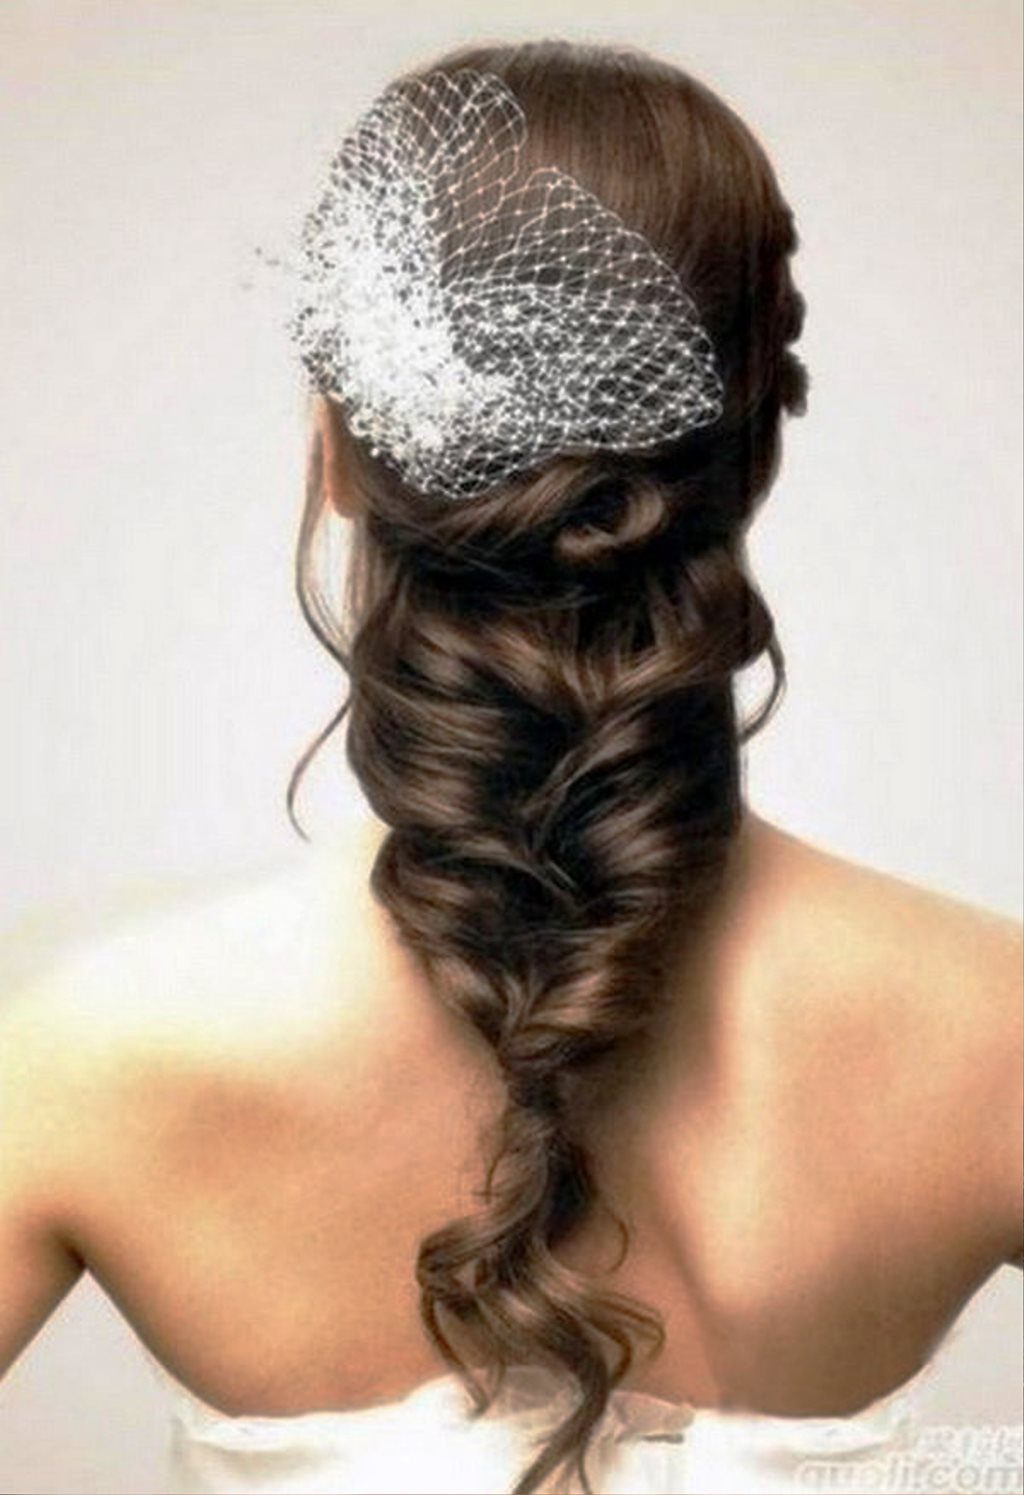 Long Bridal Hairstyles 2013 With Veil